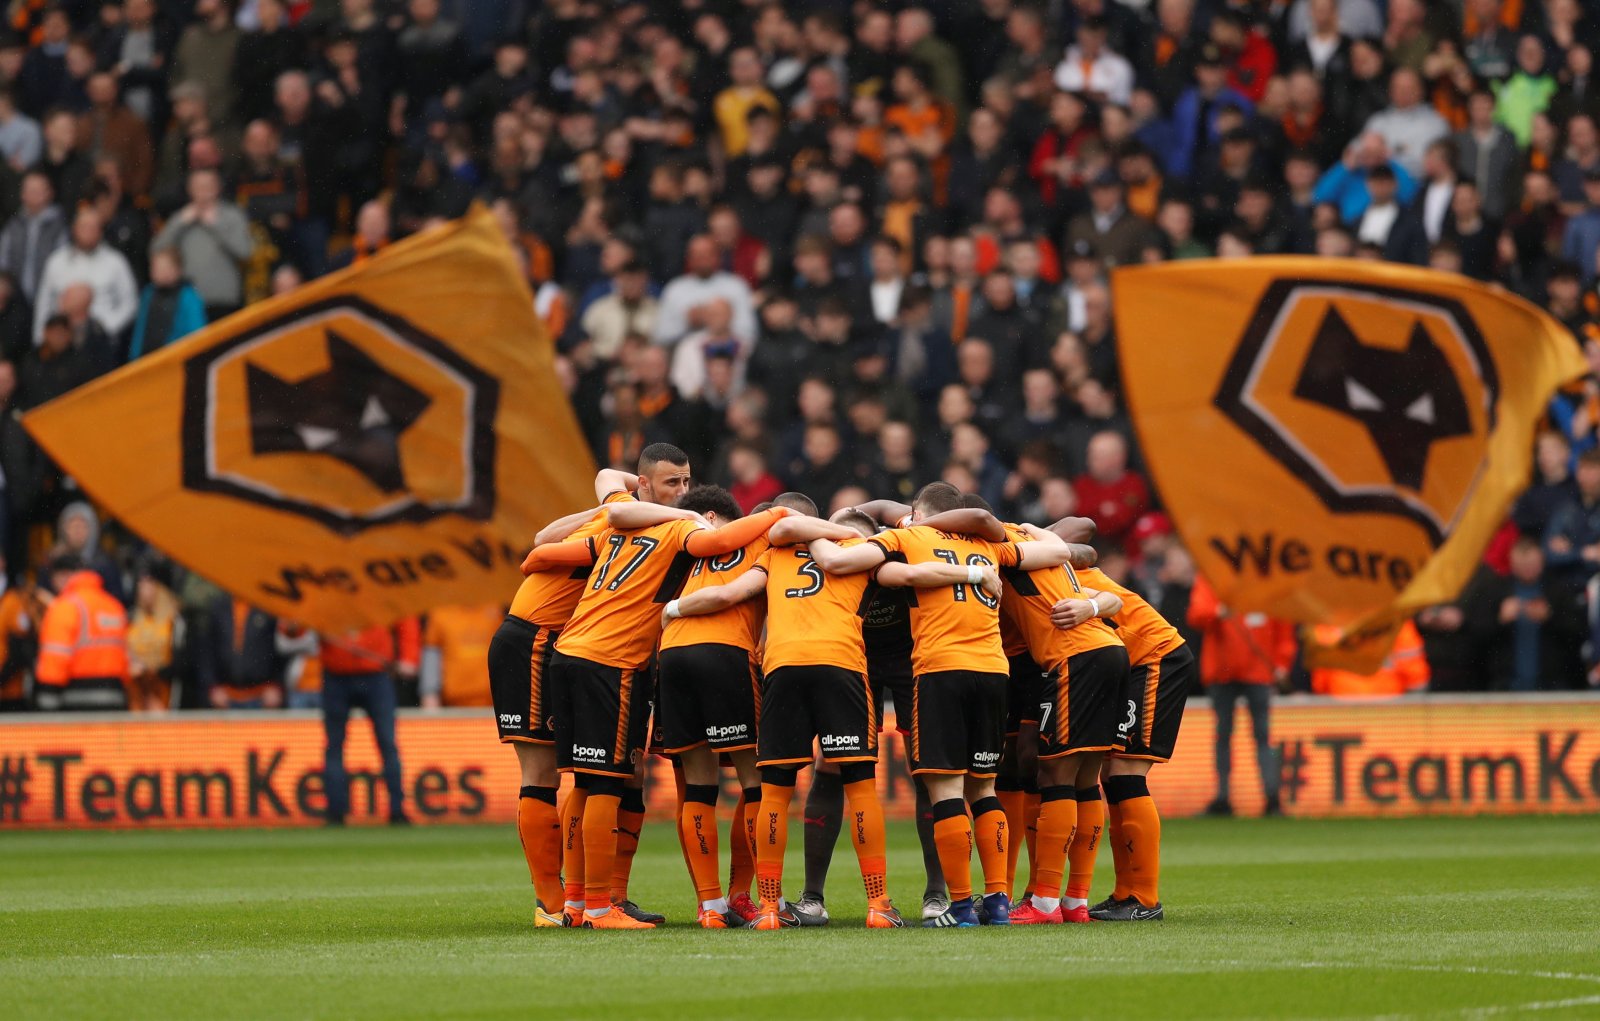 The young Wolves player became a ‘popular character’ at the Championship loan club